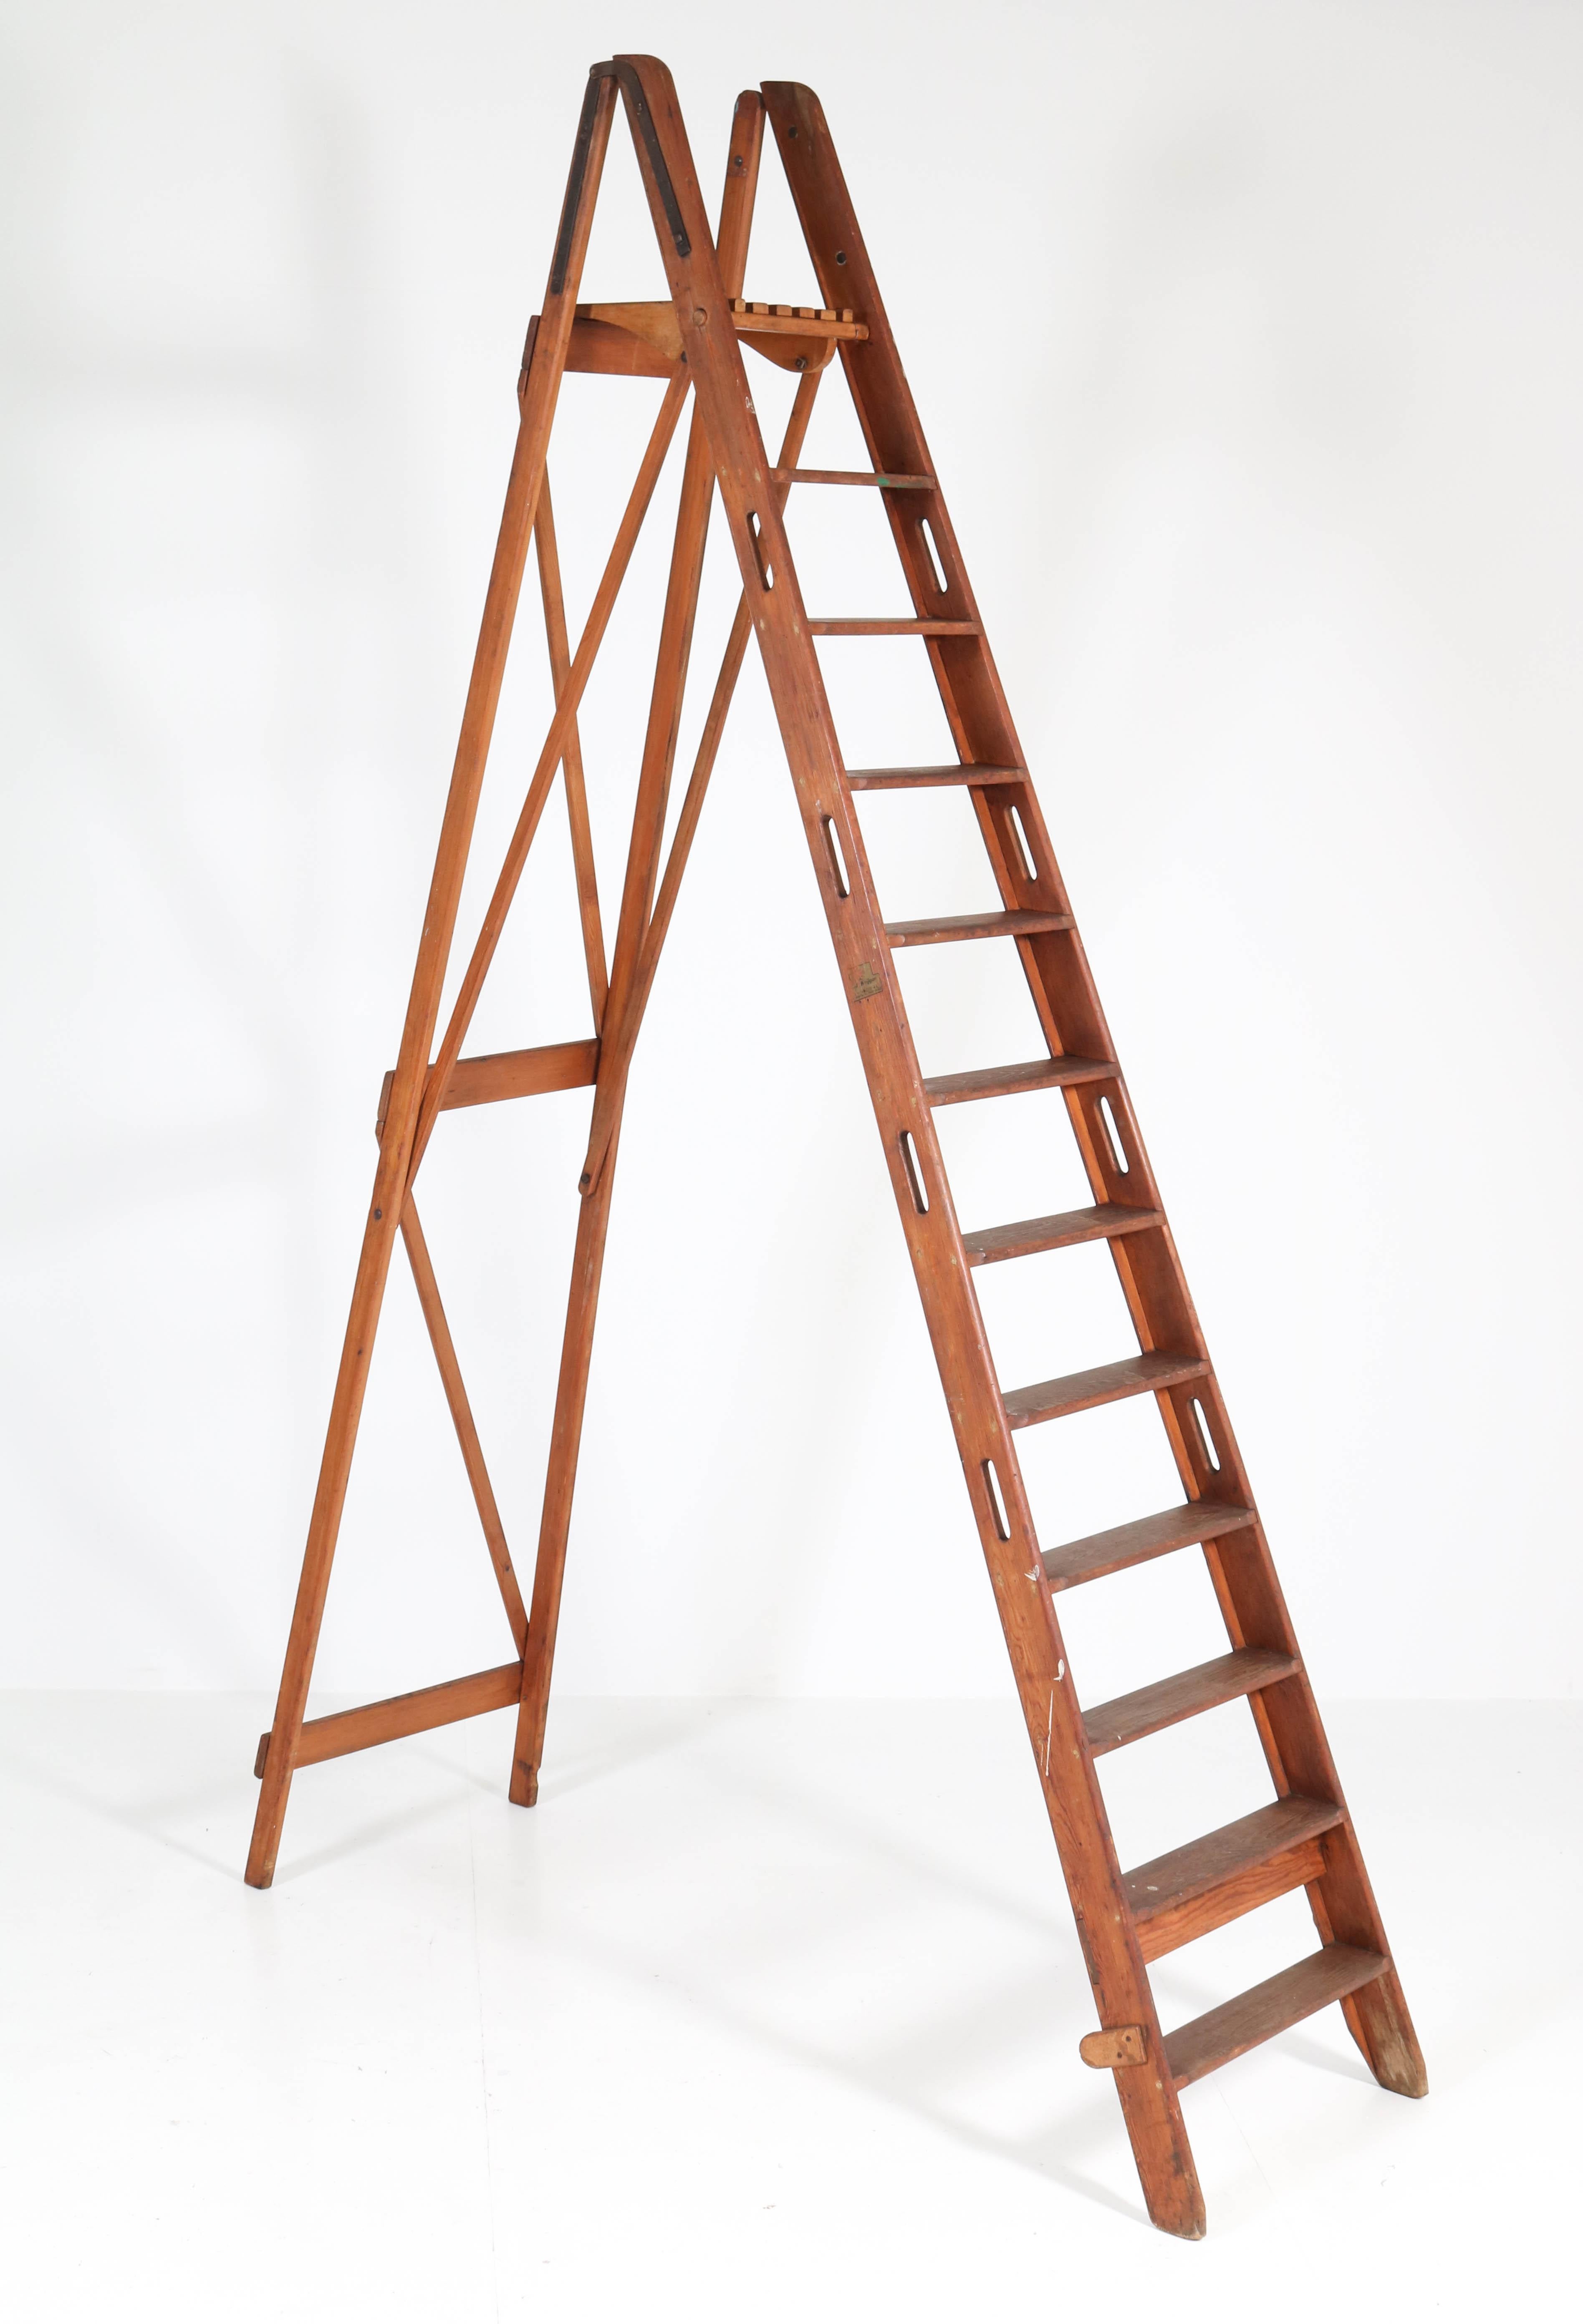 Stunning and large folding painting or library ladder.
Marked with manufacturers label de Krijger Amsterdam.
This version is rare because the ladder has eleven steps!
Solid pitch-pine.
This ladder is sturdy for use in a library or for use as